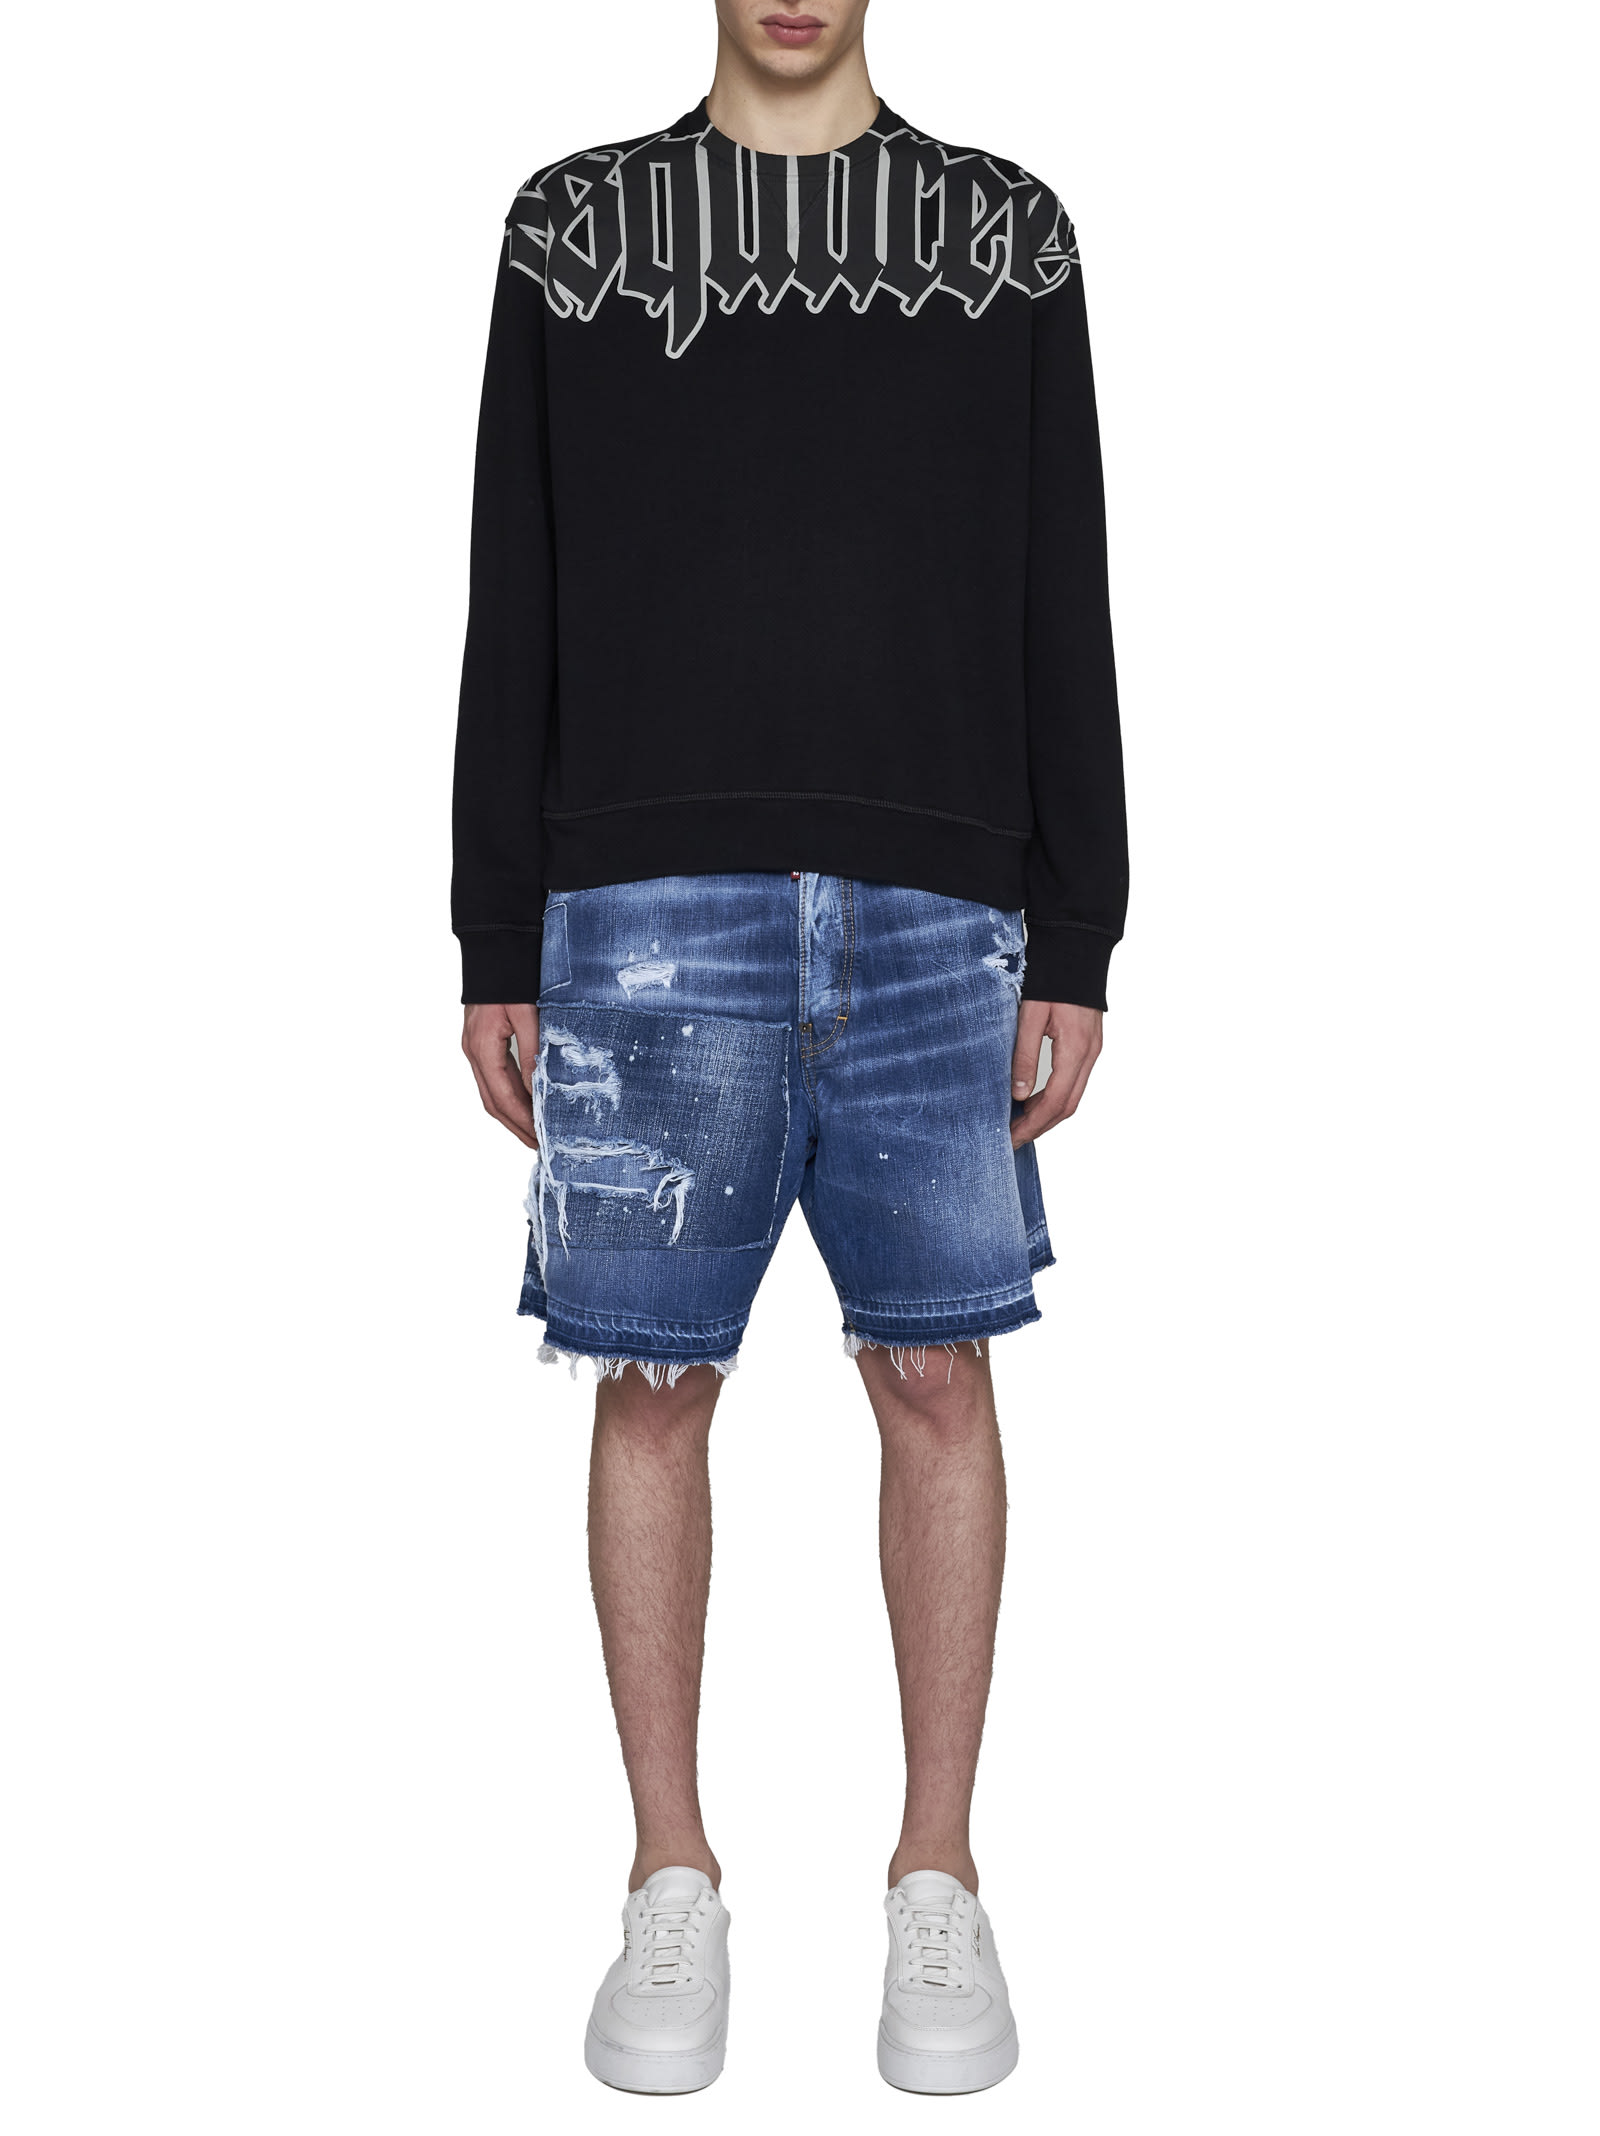 Shop Dsquared2 Shorts In Navy Blue